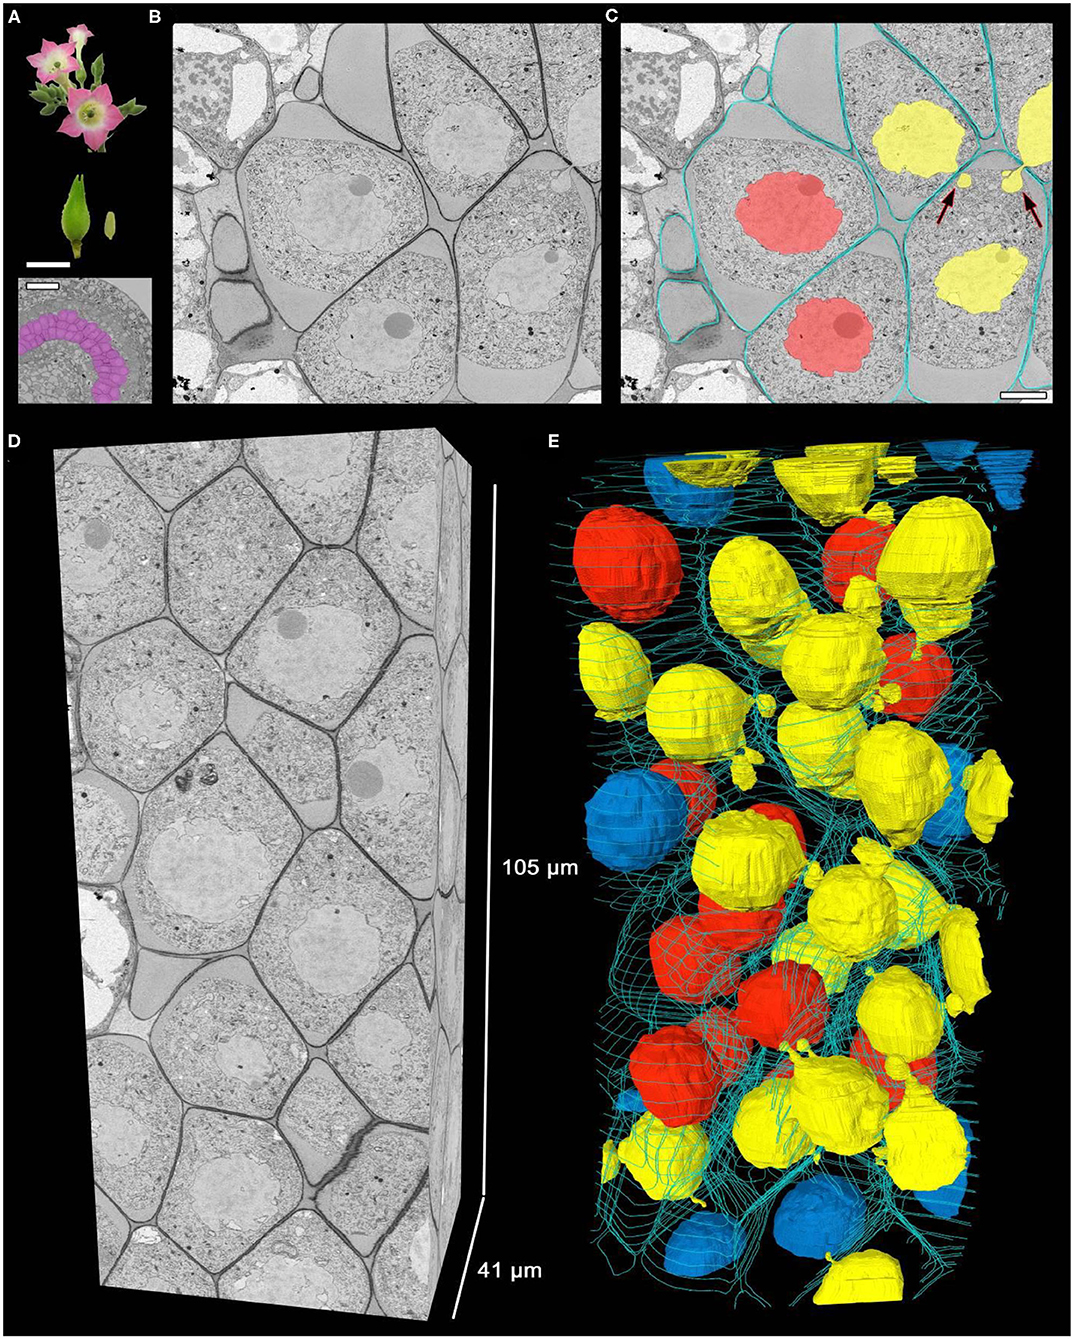 Frontiers Serial Block Face Scanning Electron Microscopy Reveals That Intercellular Nuclear Migration Occurs In Most Normal Tobacco Male Meiocytes Plant Science